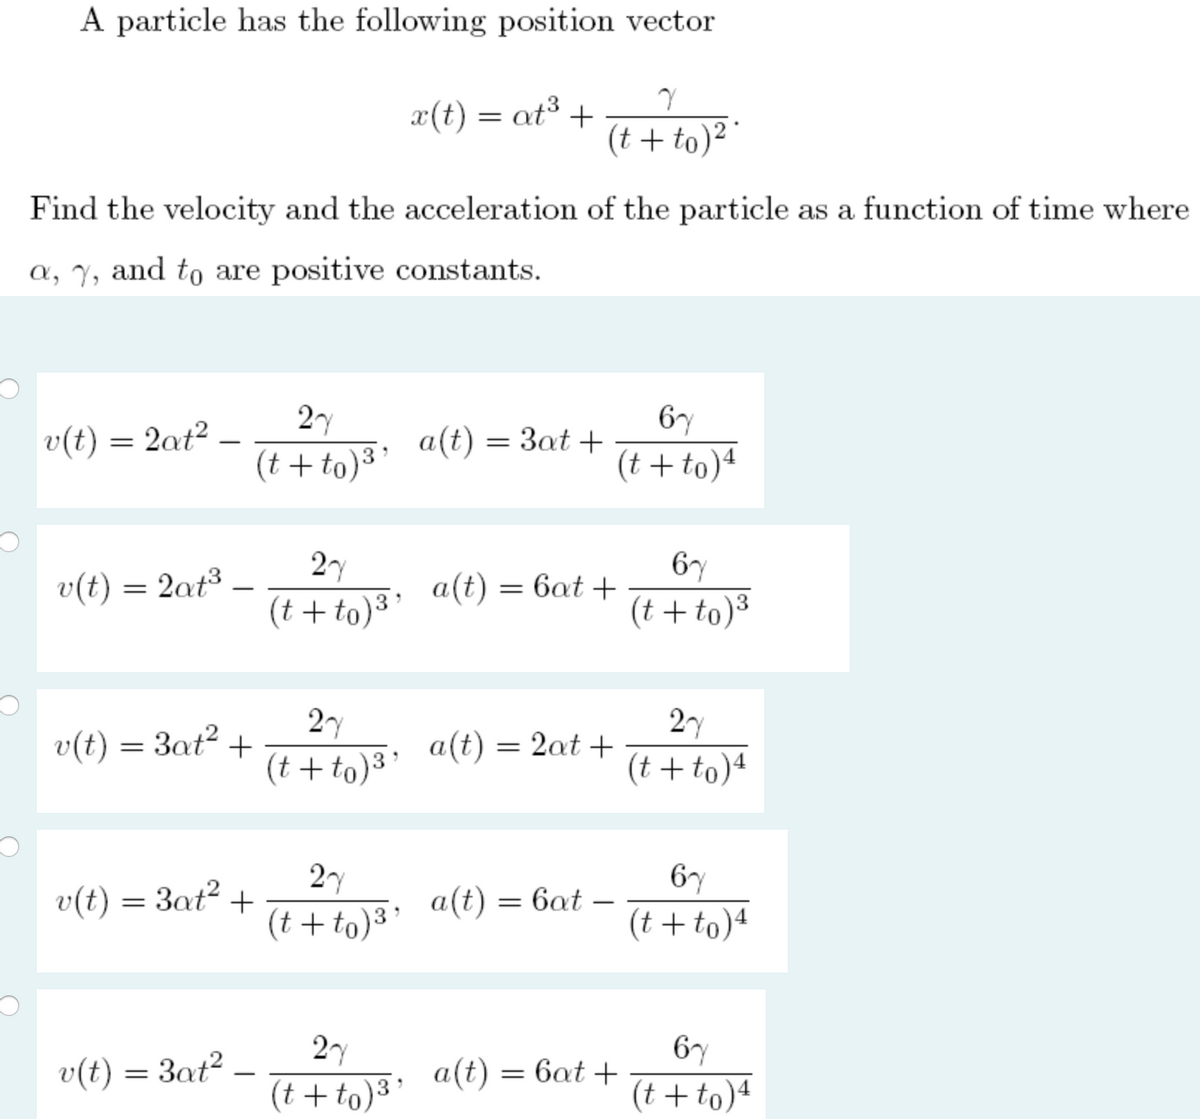 A particle has the following position vector
x(t) = at³ +
(t + to) "
Find the velocity and the acceleration of the particle as a function of time where
a, y, and to are positive constants.
v(t)
2at?
2y
6y
a(t) = 3at +
-
(t + to)³
(t +to)4
2y
6y
v(t) = 2at³
a(t)
(t + to)3'
= 6at +
-
(t + to)³
27
v(t) = 3at² +
(t + to)3
2y
a(t) :
2at +
(t +to)4
2y
6y
v(t) = 3at²
+
(t + to) "
a(t) = 6at
(t + to)ª
27
6y
v(t) = 3at?
a(t)
(t + to)3
= 6at +
-
(t + to)4
